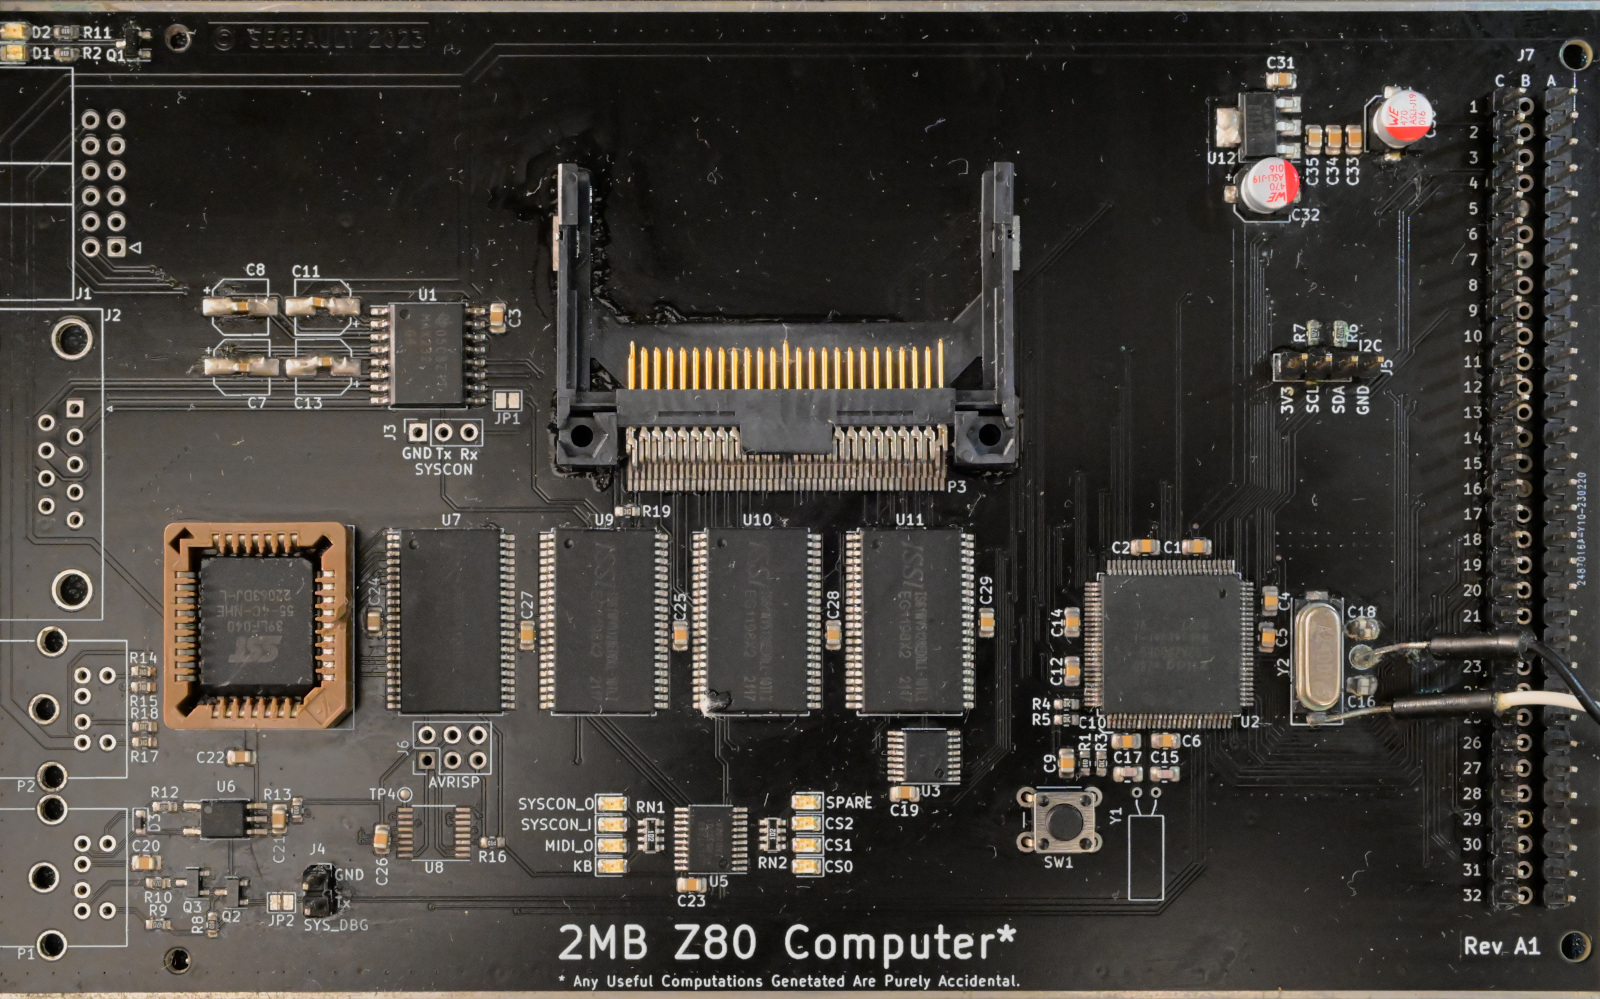 The finished eZ80 board.